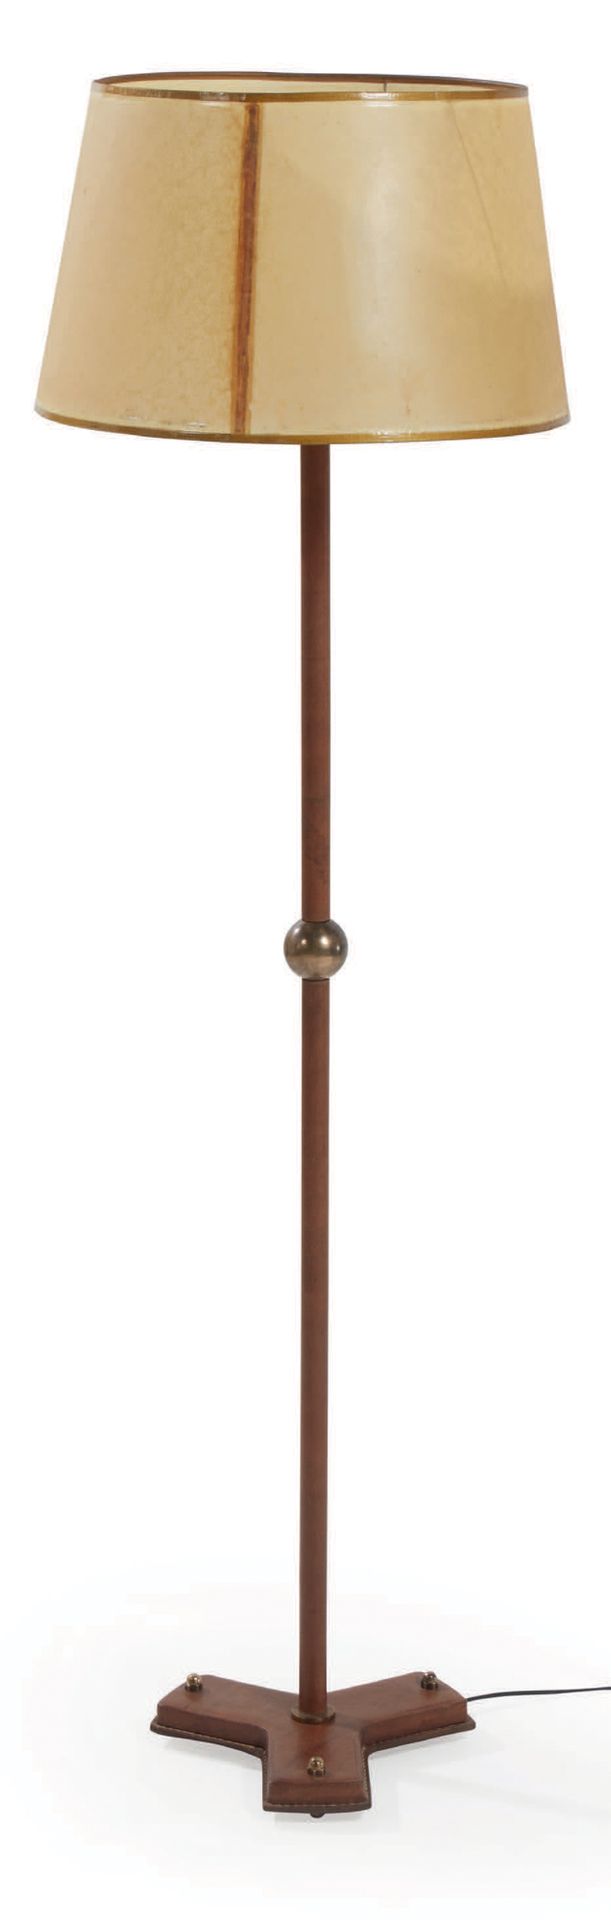 Jacques ADNET, attribué à Floor lamp entirely in brown leather with saddle stitc&hellip;